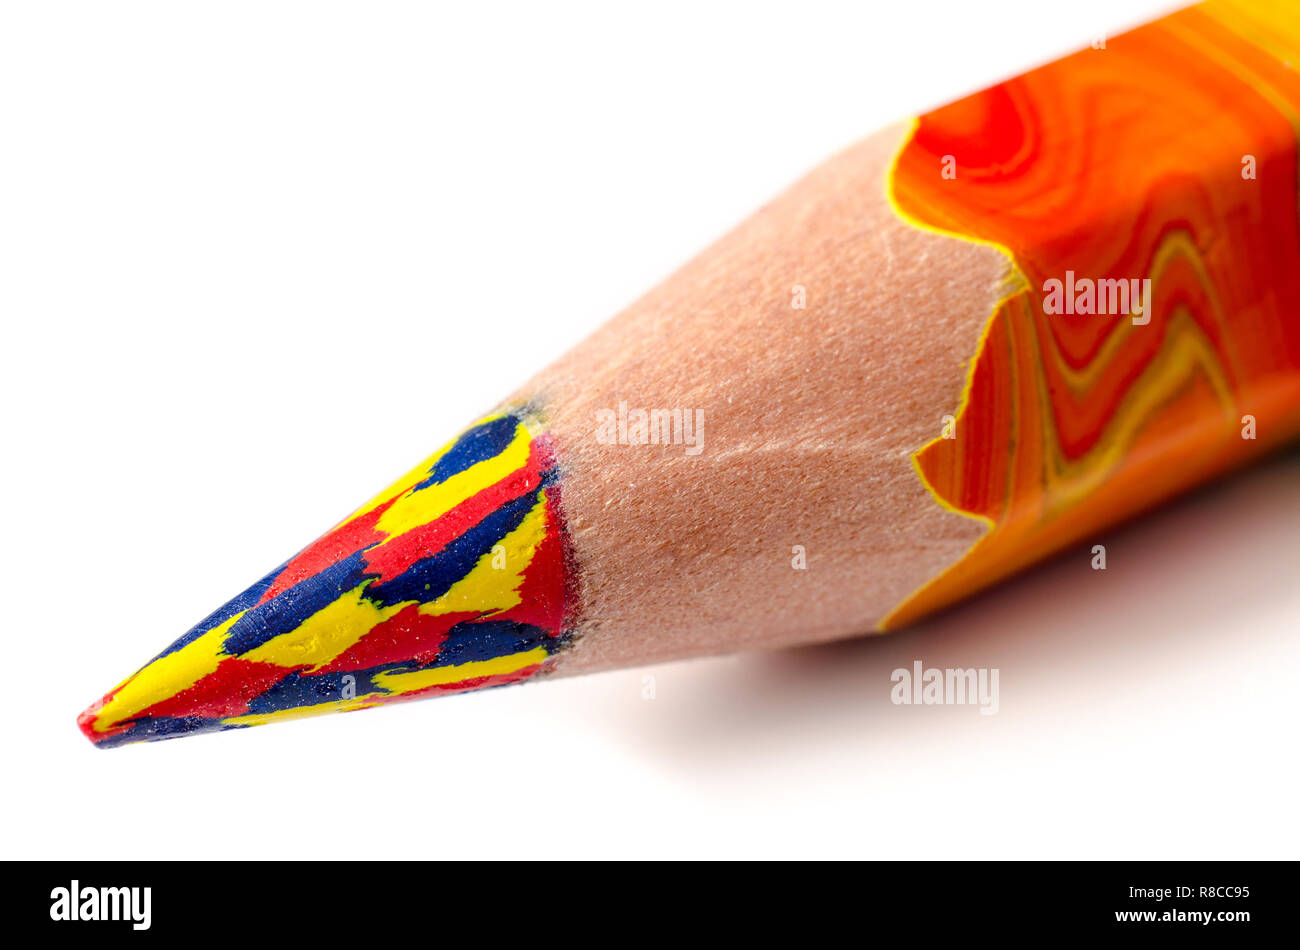 pencil tip isolated on a white background Stock Photo